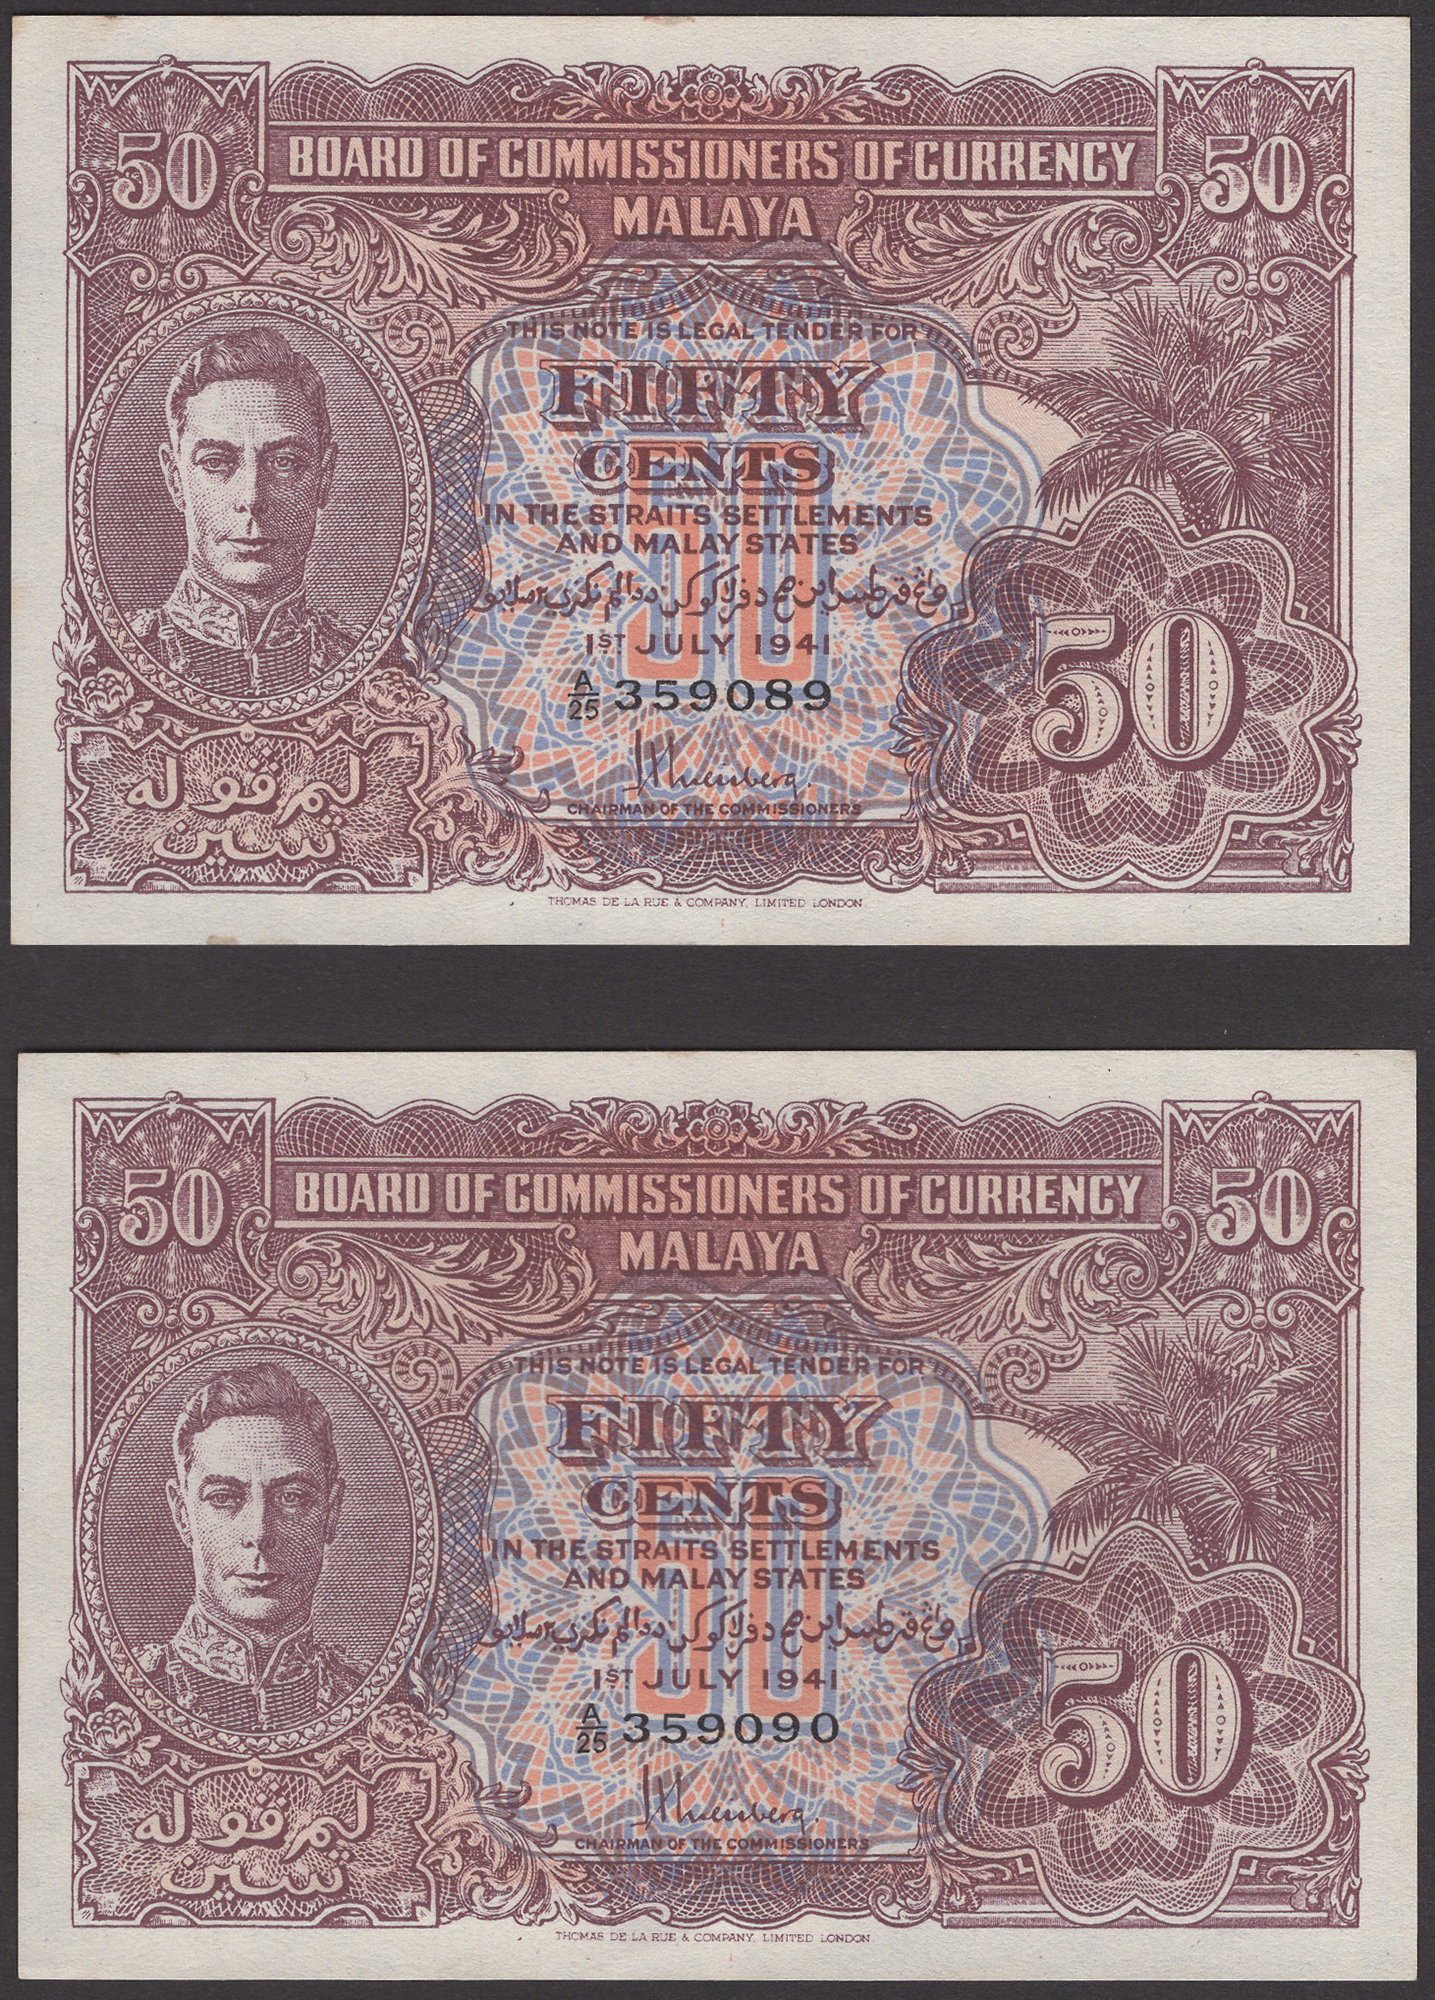 Board of Commissioners of Currency Malaya, 50 Cents (2), 1 July 1941, serial numbers A/25...